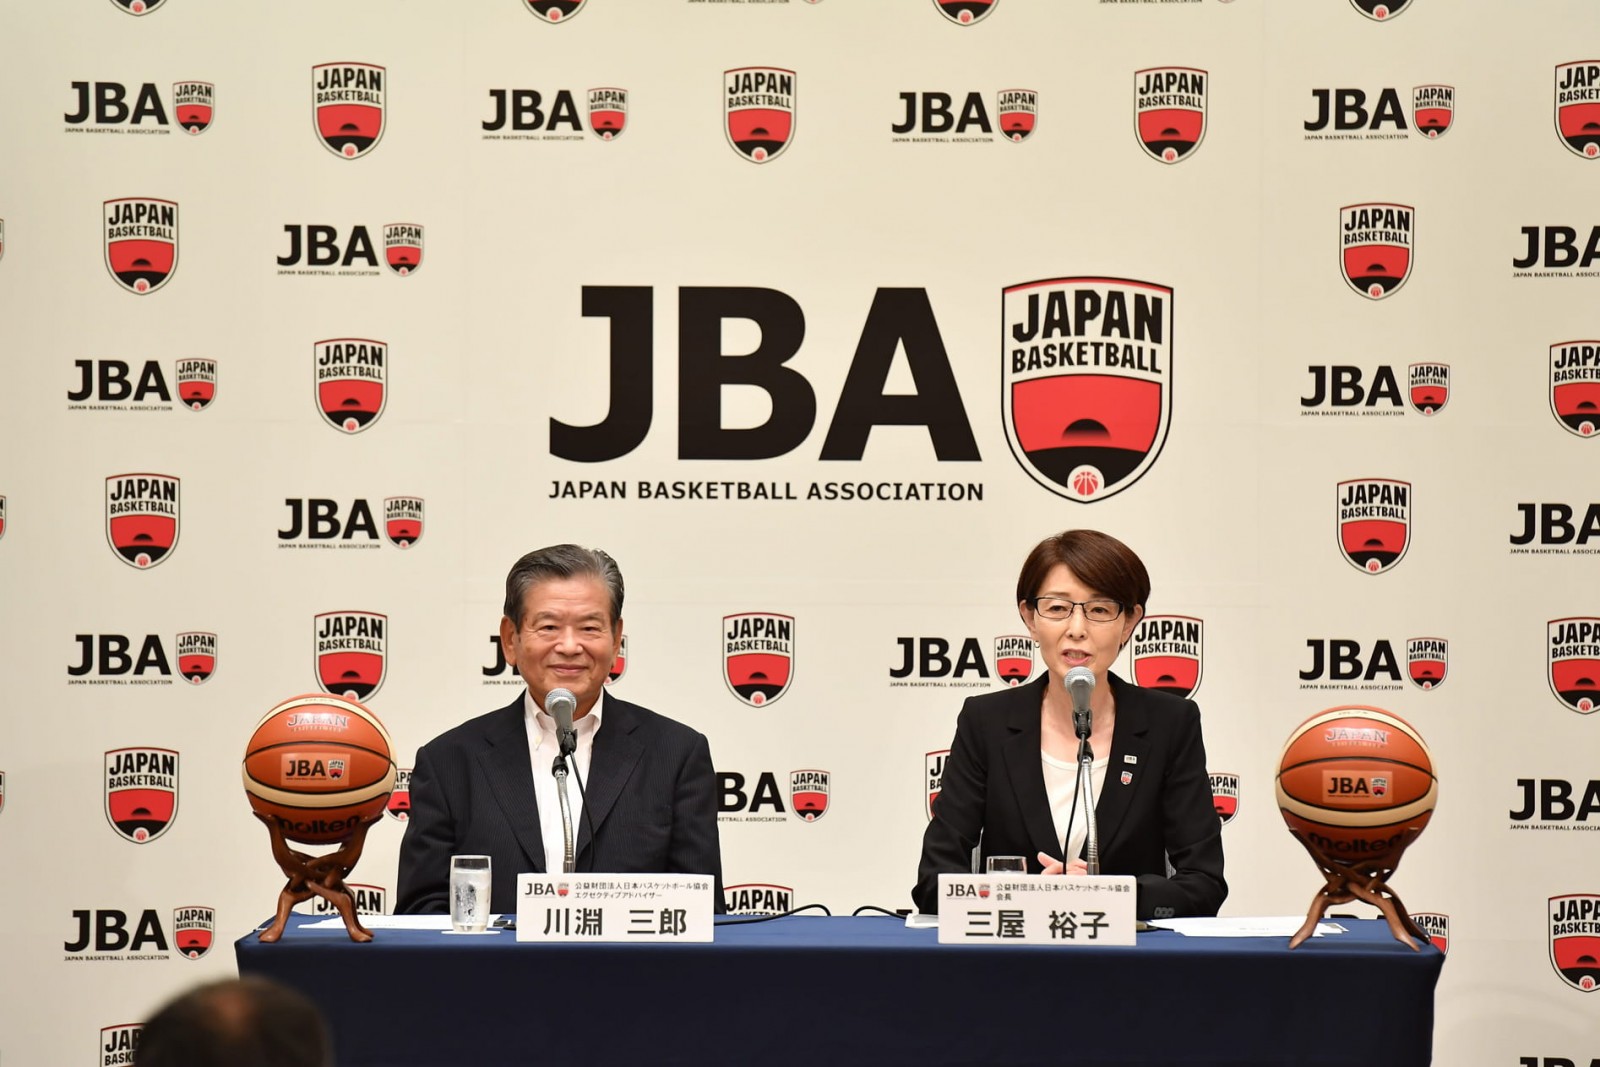 Yuko Mitsuya, right, at a press conference after being named to succeed Kawabuchi, left, as president of the Japan Basketball Association. ©Japan Basketball Association